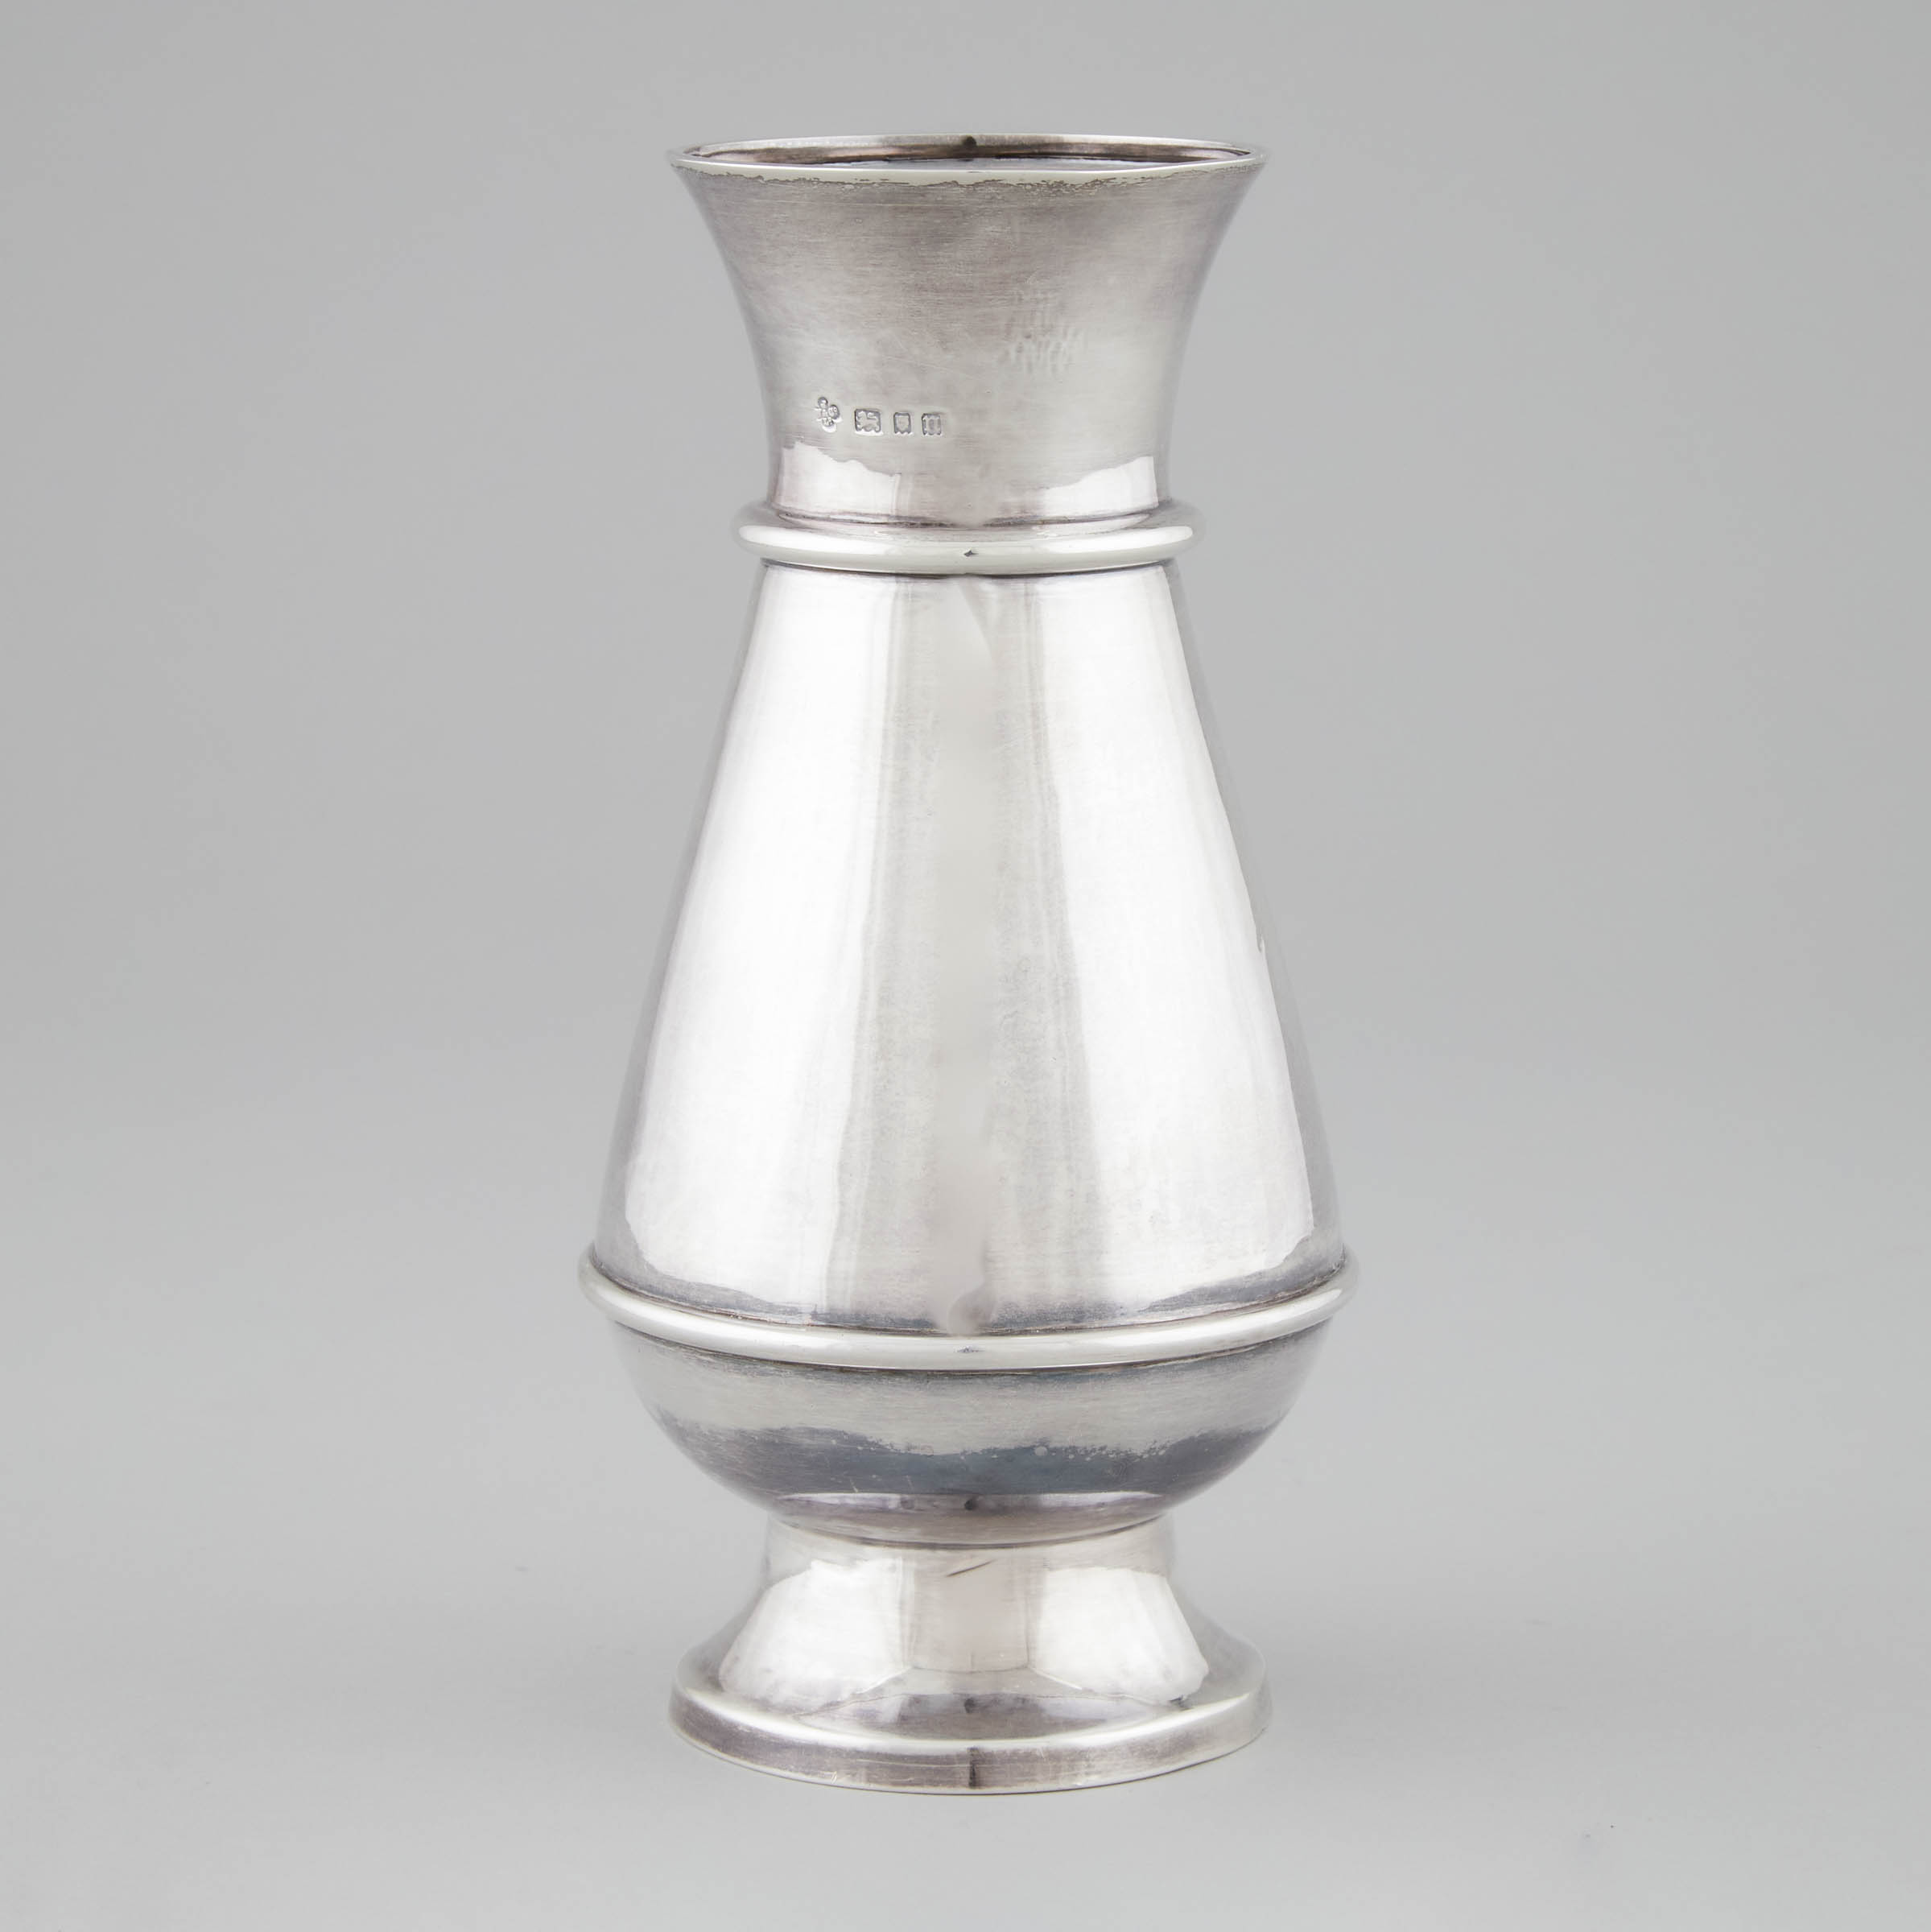 English Silver Vase, J. Wippell